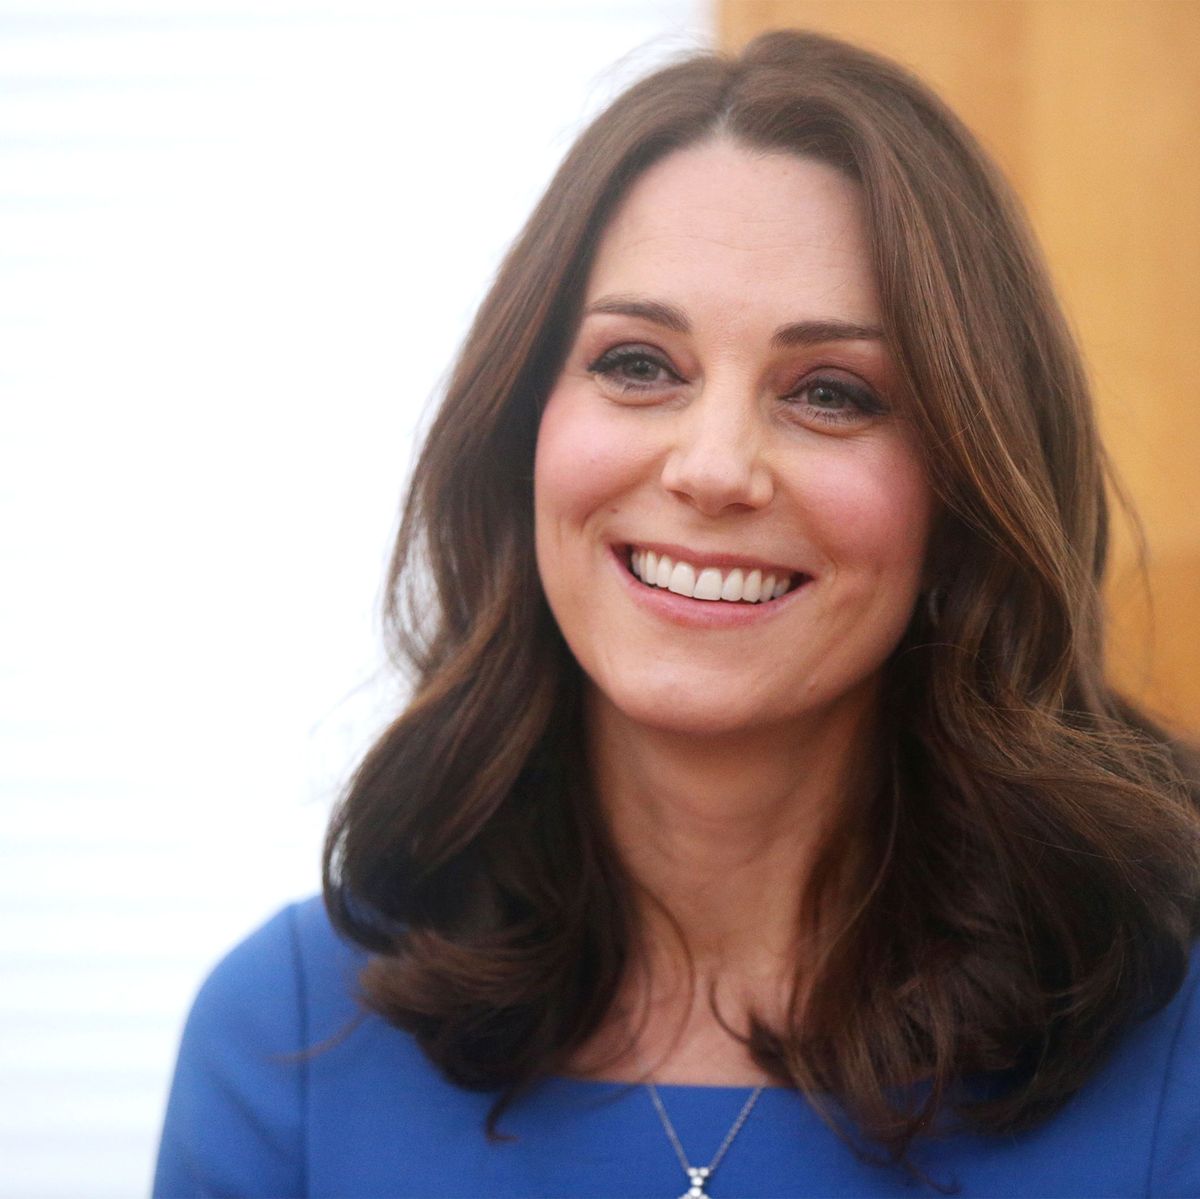 Kate Middleton in Labor with Royal Baby 3 - Kate Middleton Is Giving ...